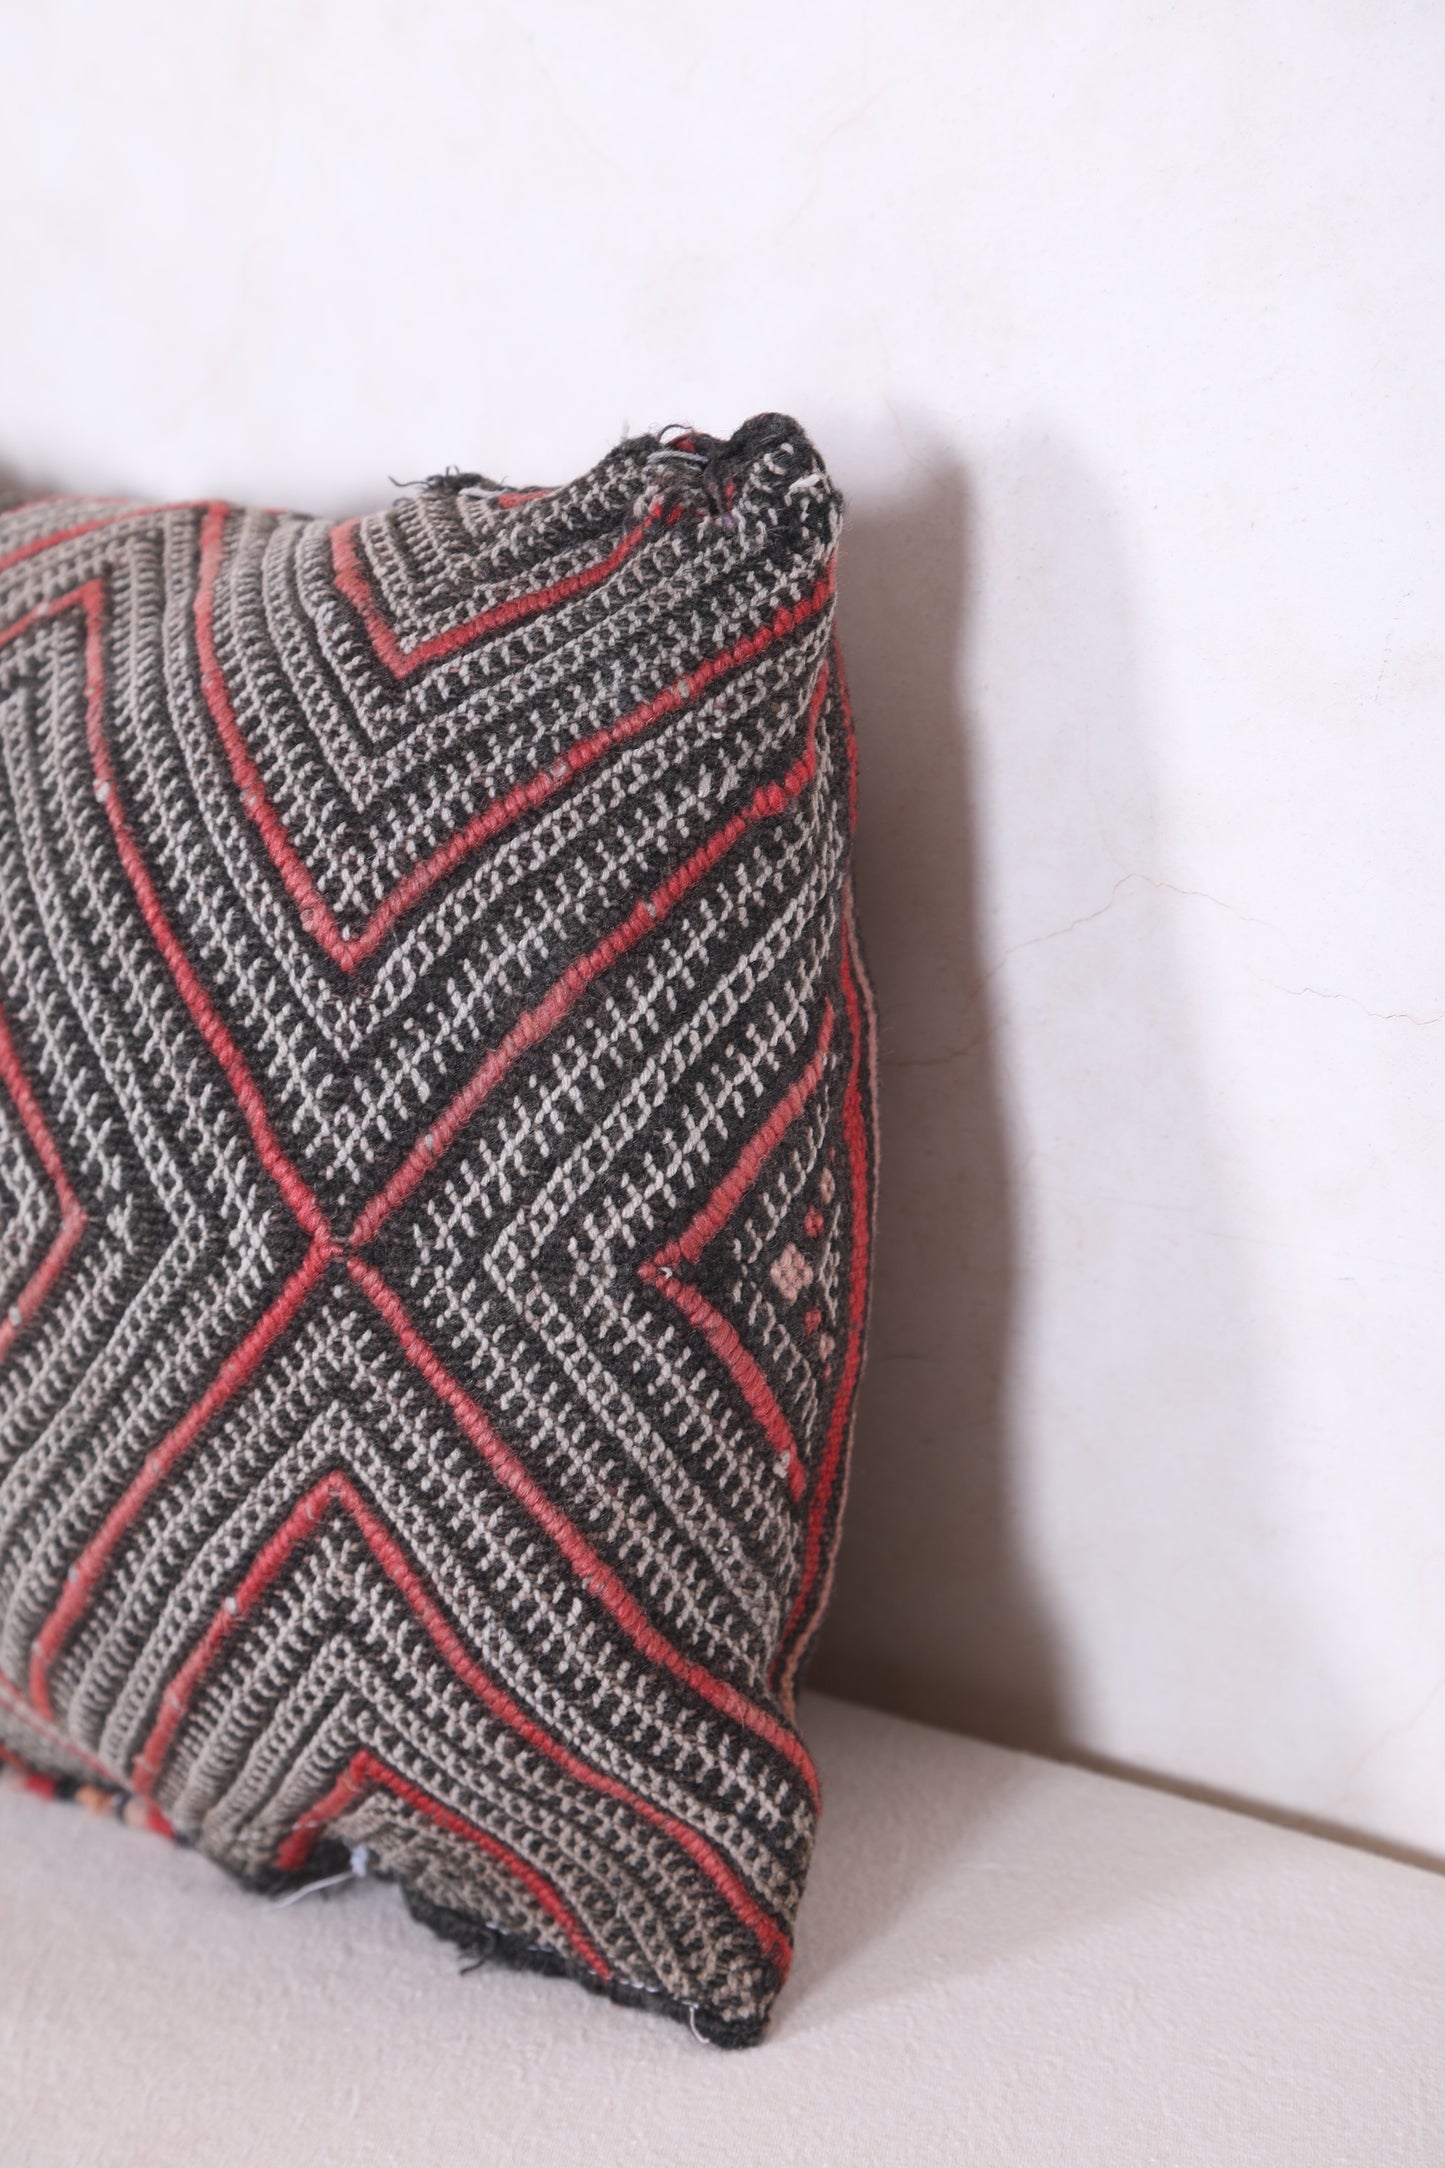 Striped Moroccan pillow 12.2 INCHES X 18.1 INCHES